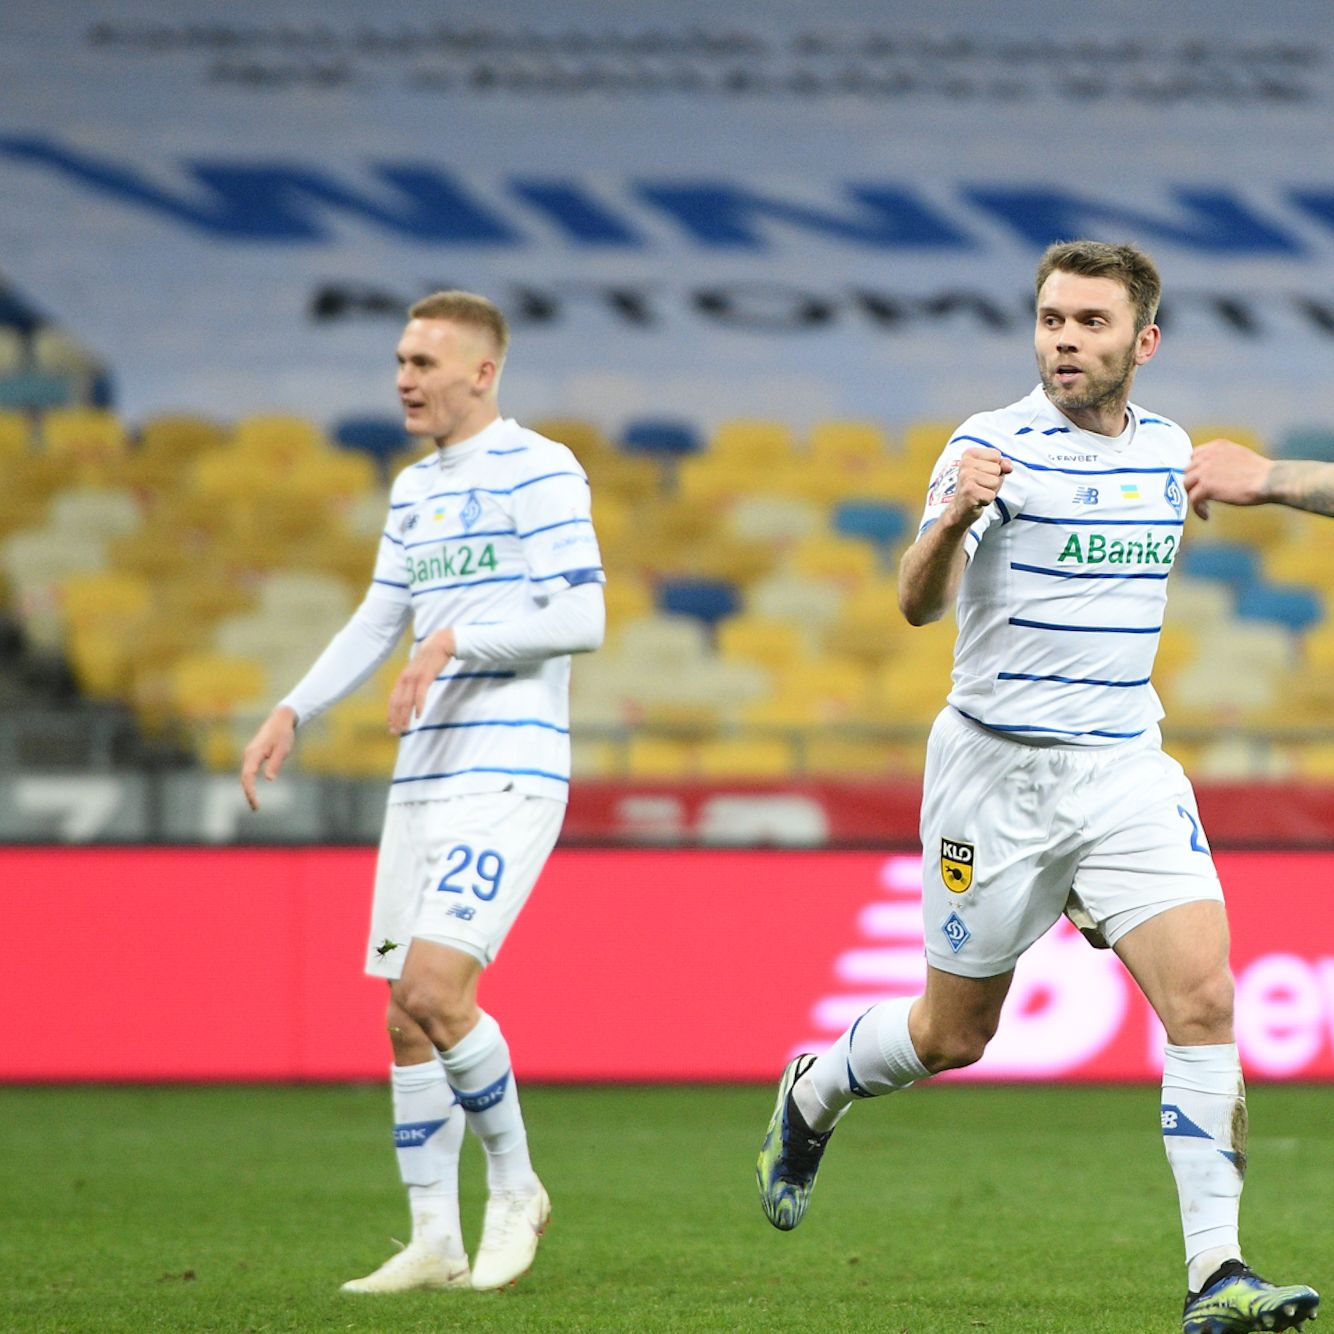 Olexandr Karavayev: “We needed to score the opener as quickly as possible”